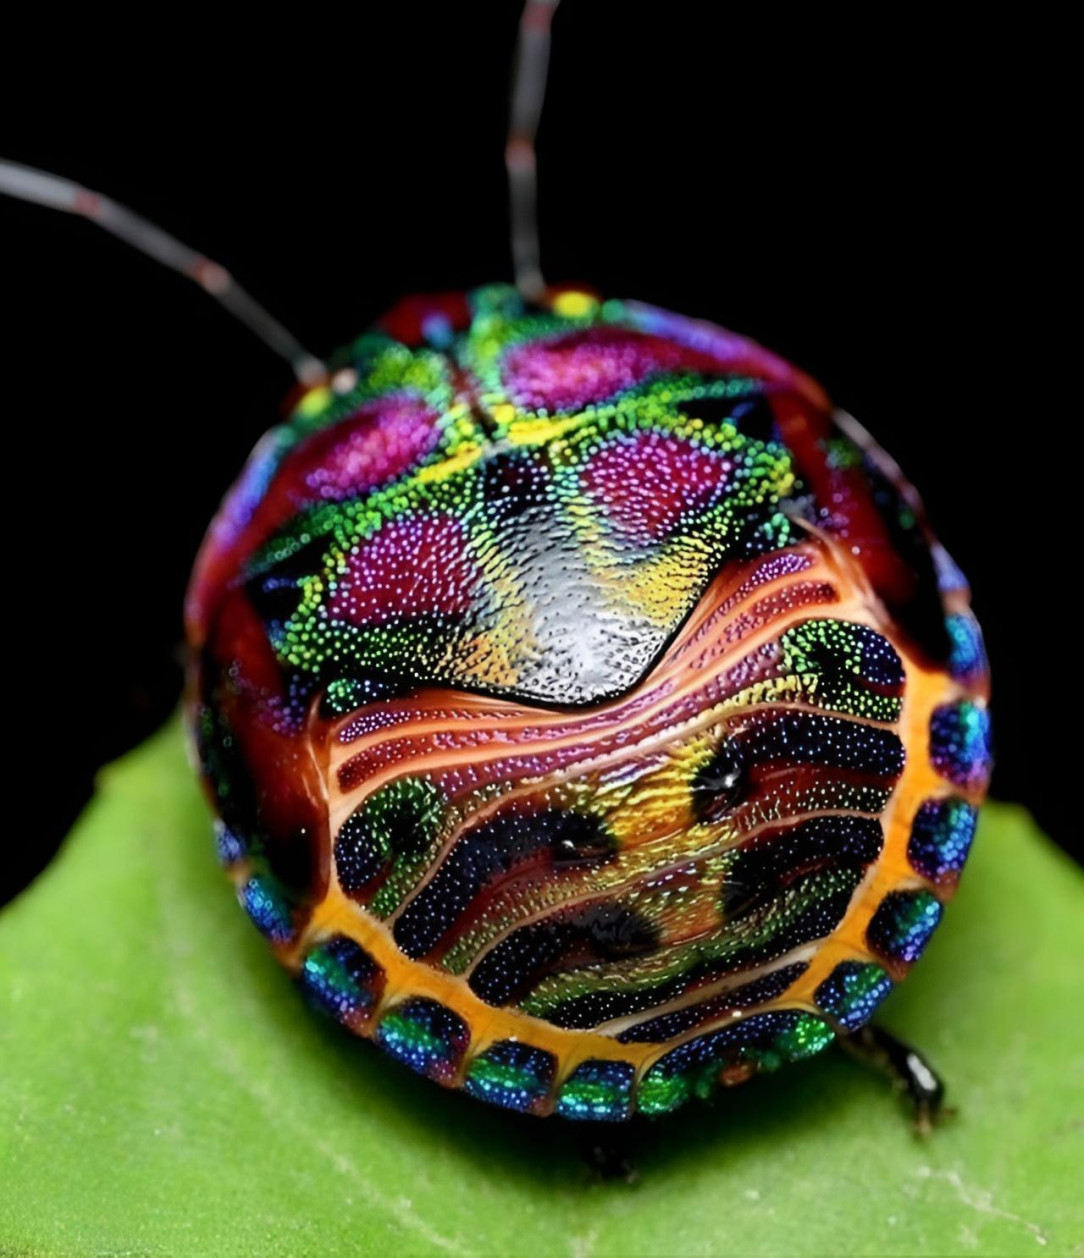 The Harlequin Bug has so many color variants that no two bugs are identical